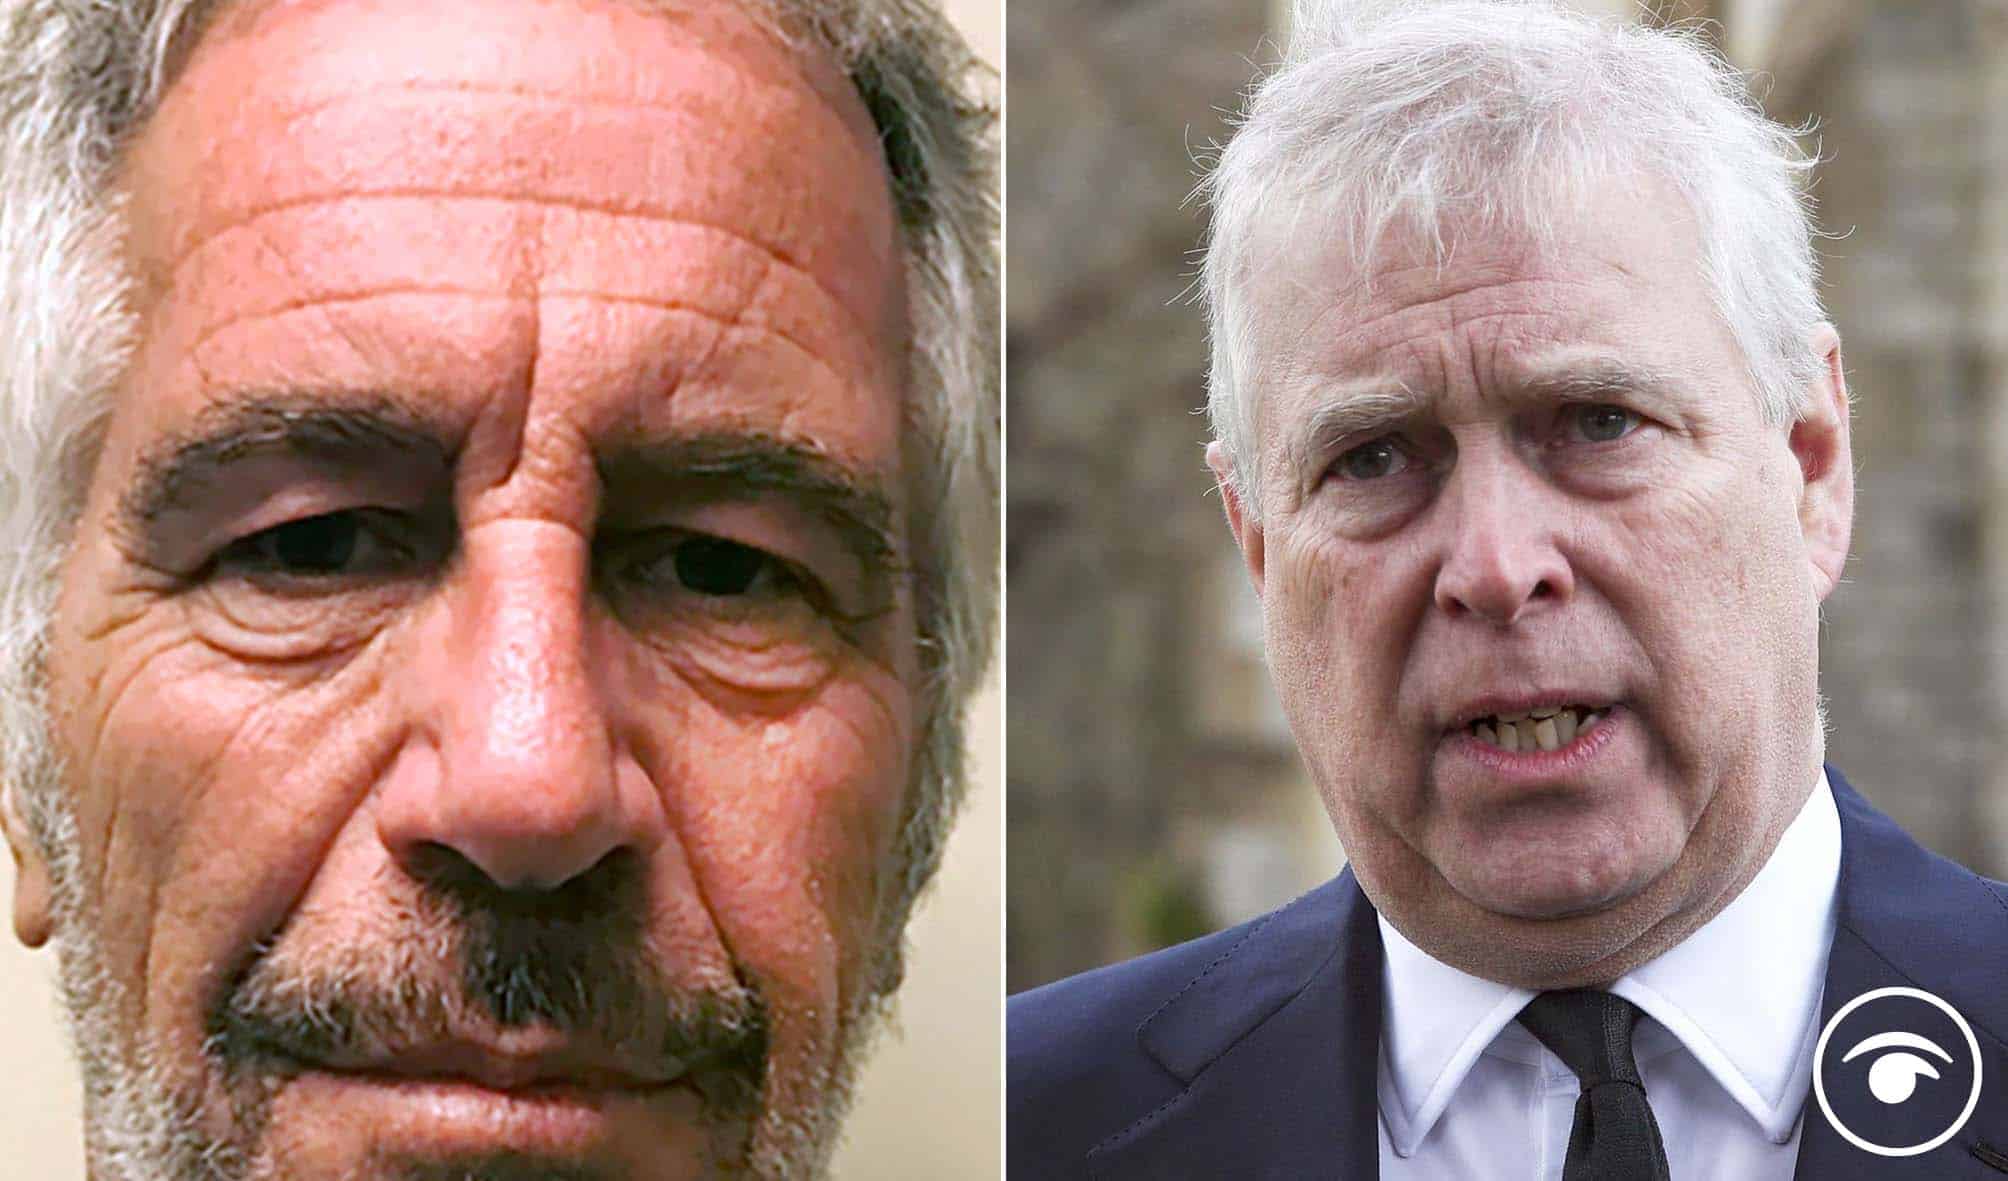 Prince Andrew named in court documents relating to paedophile Jeffrey Epstein